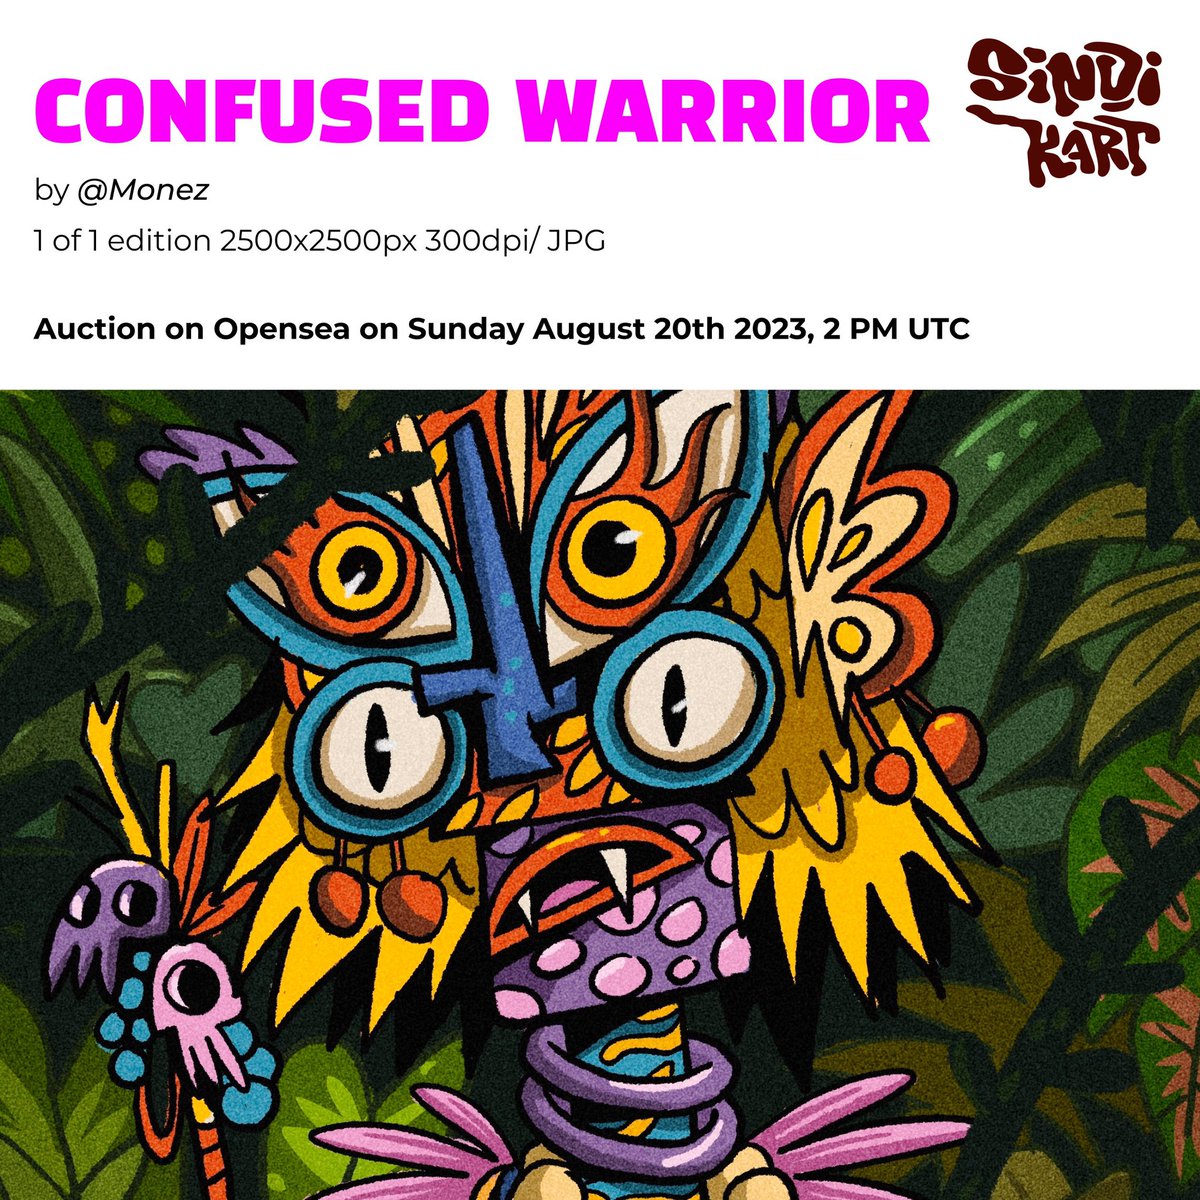 Did you confused too? Cause @MonezNft just give us CONFUSED WARRIOR “In the middle of the battlefield, a formidable warrior stood confused amidst the chaos of the raging battle.”